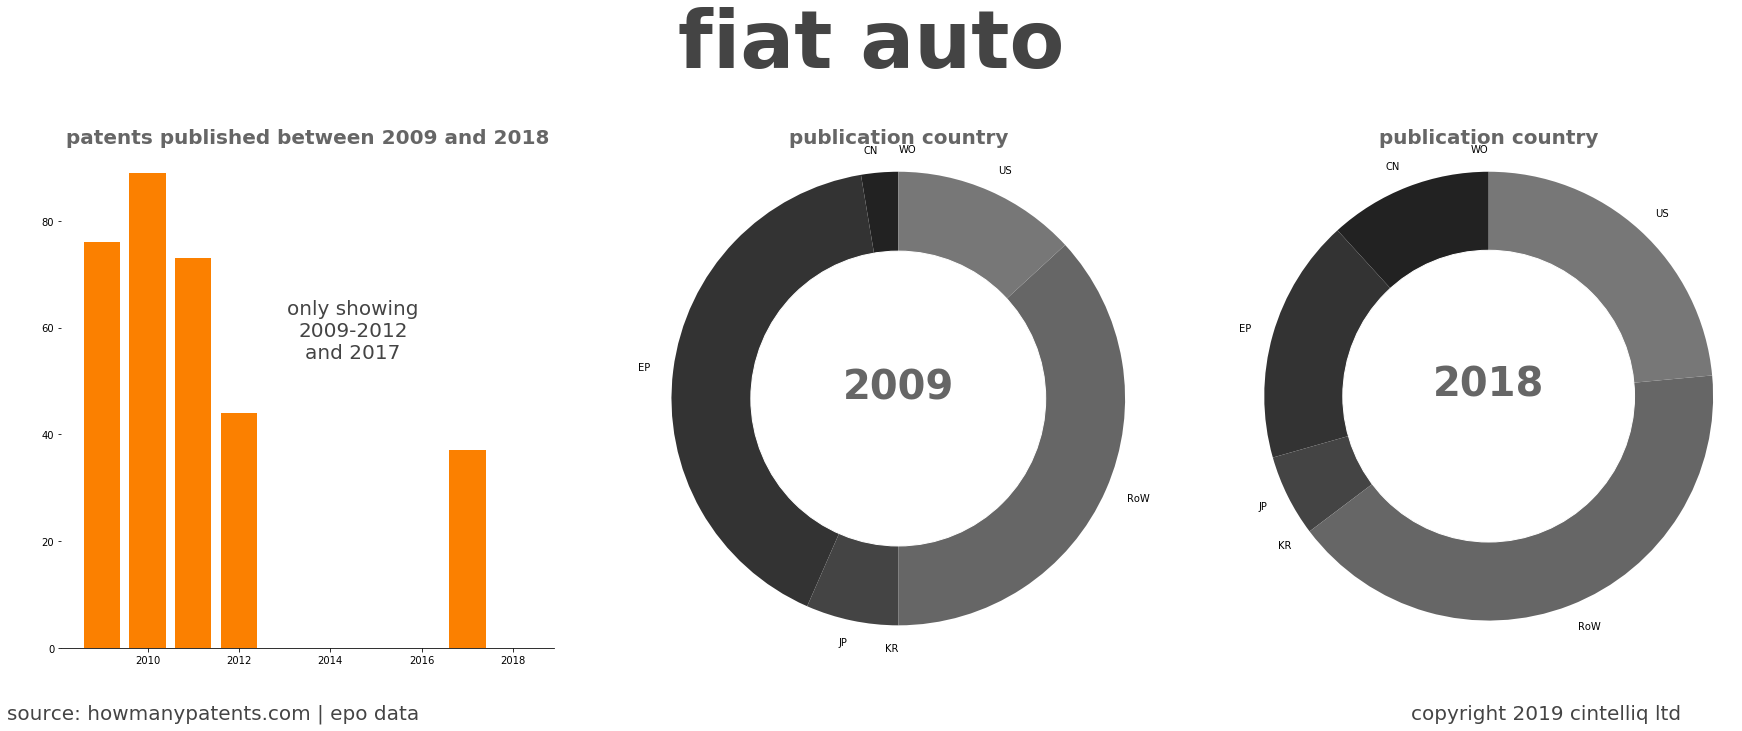 summary of patents for Fiat Auto